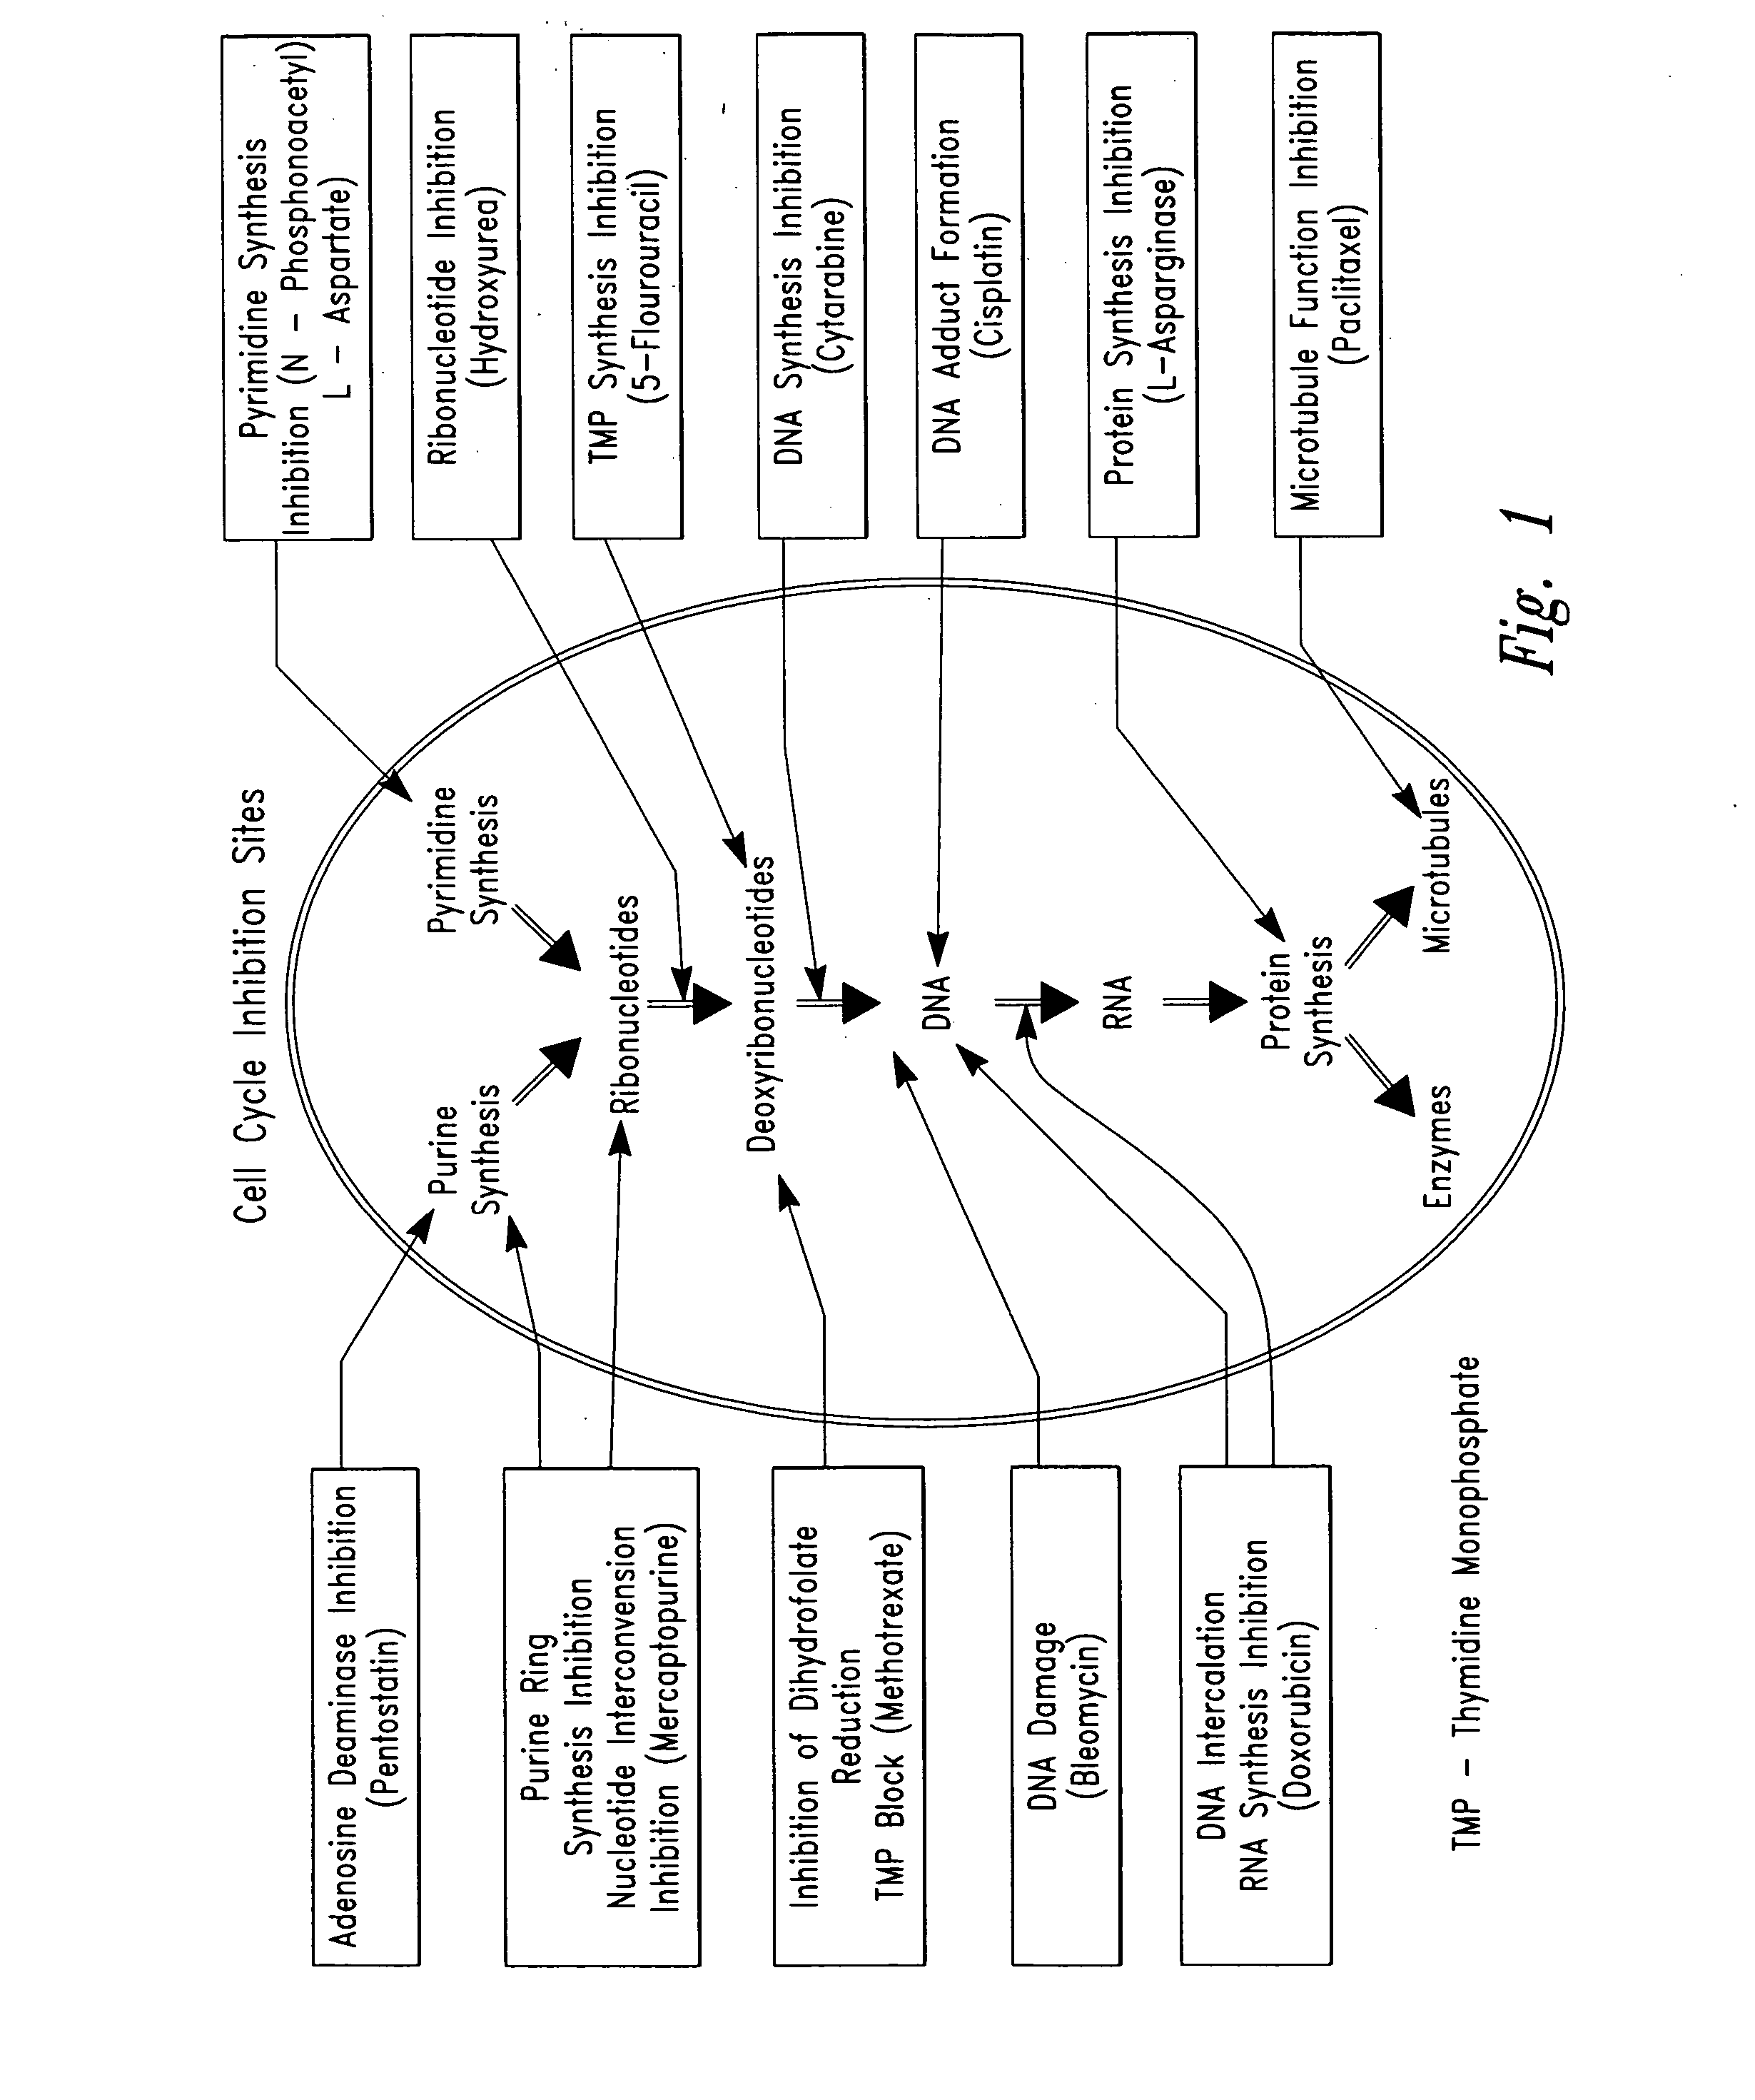 Compositions and methods for treating disease utilizing a combination of radioactive therapy and cell-cycle inhibitors